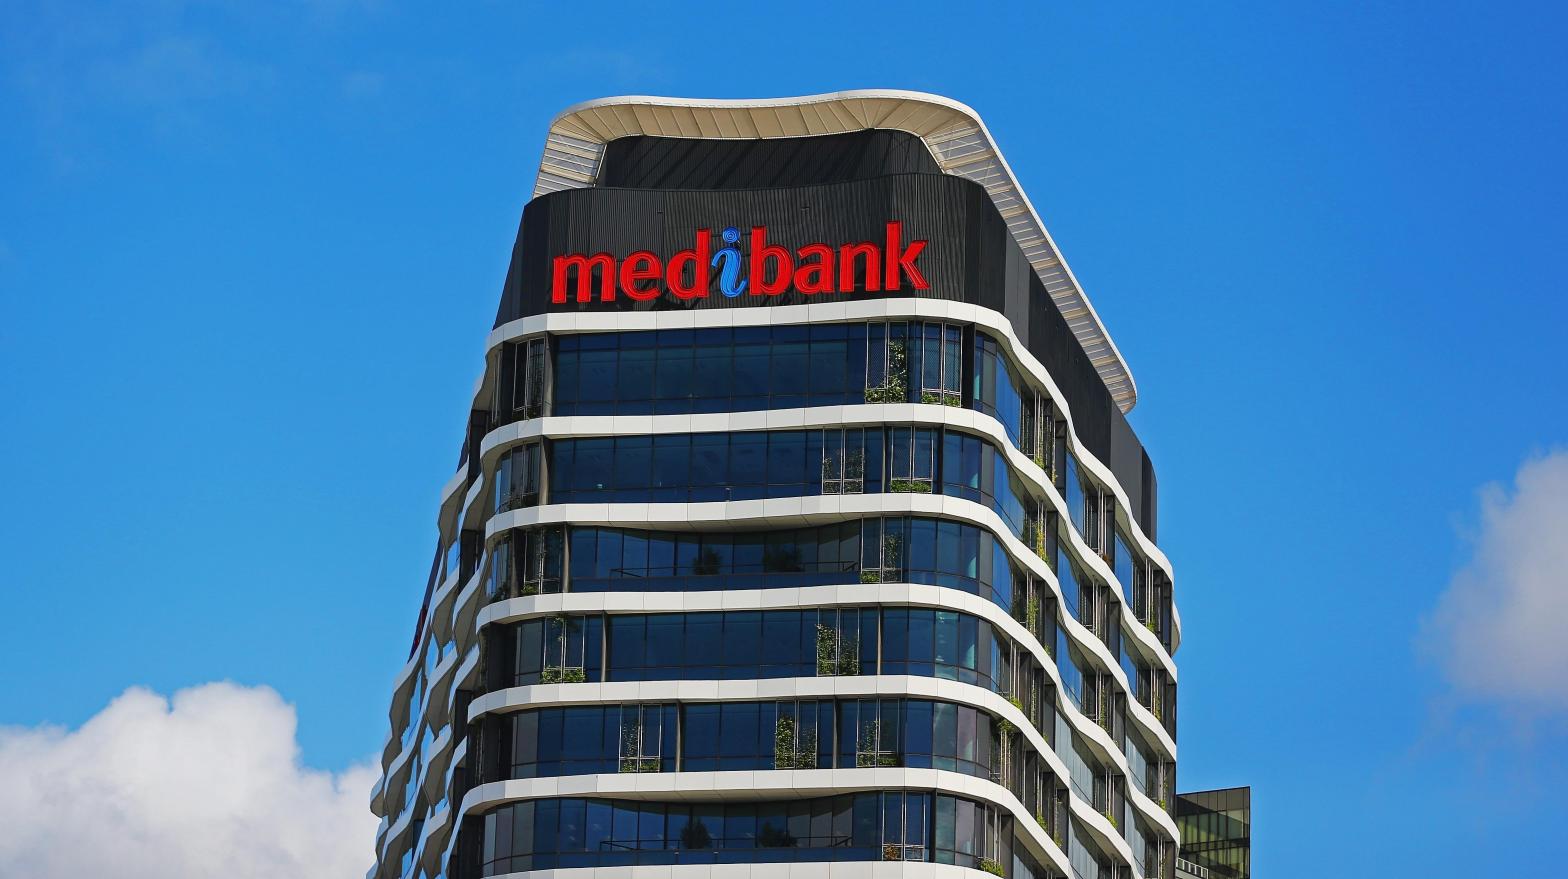 Medibank signage sits on top of the Medibank building on October 1, 2014 in Melbourne, Australia. (Photo: Scott Barbour, Getty Images)